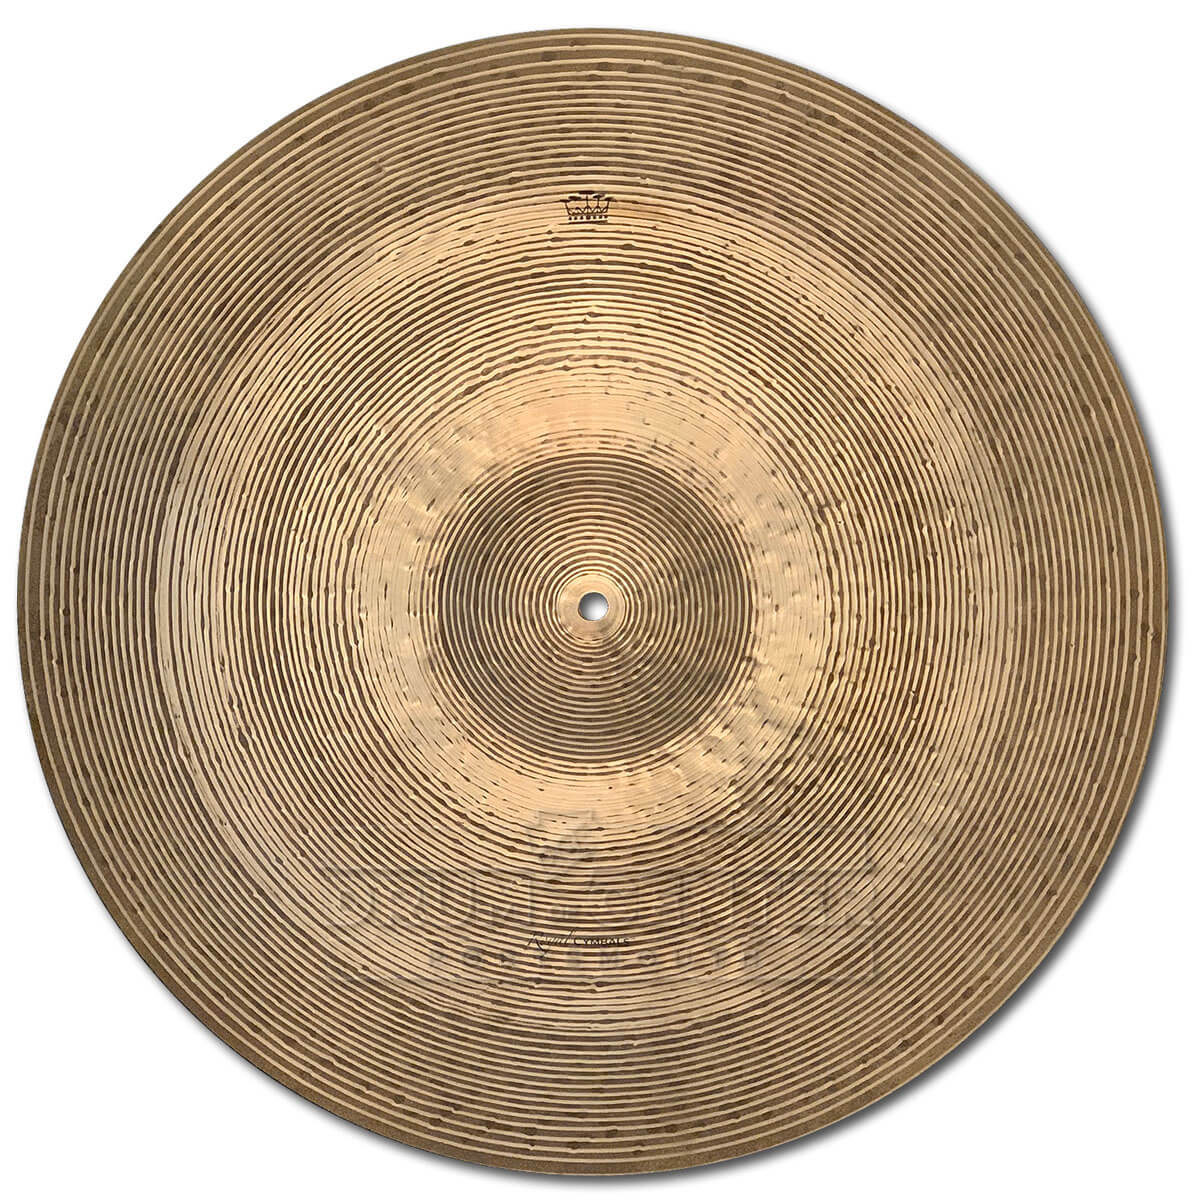 Royal Cymbals Royal Dry Crash Ride Cymbal 21" 2536 grams - Drum Center Of Portsmouth